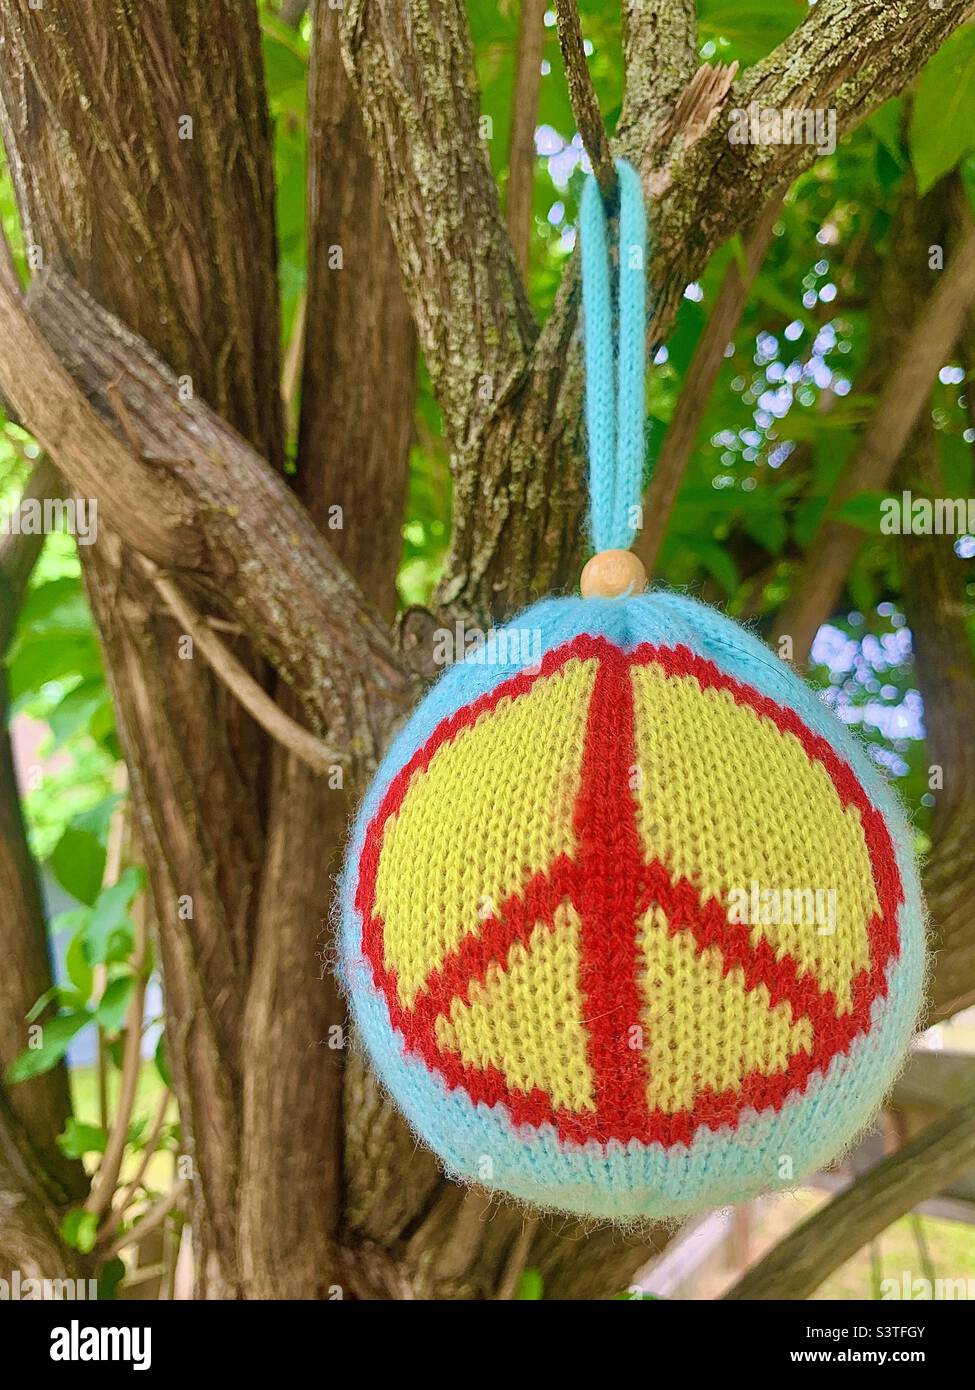 Textured peace symbol ornament hanging from outside tree Stock Photo